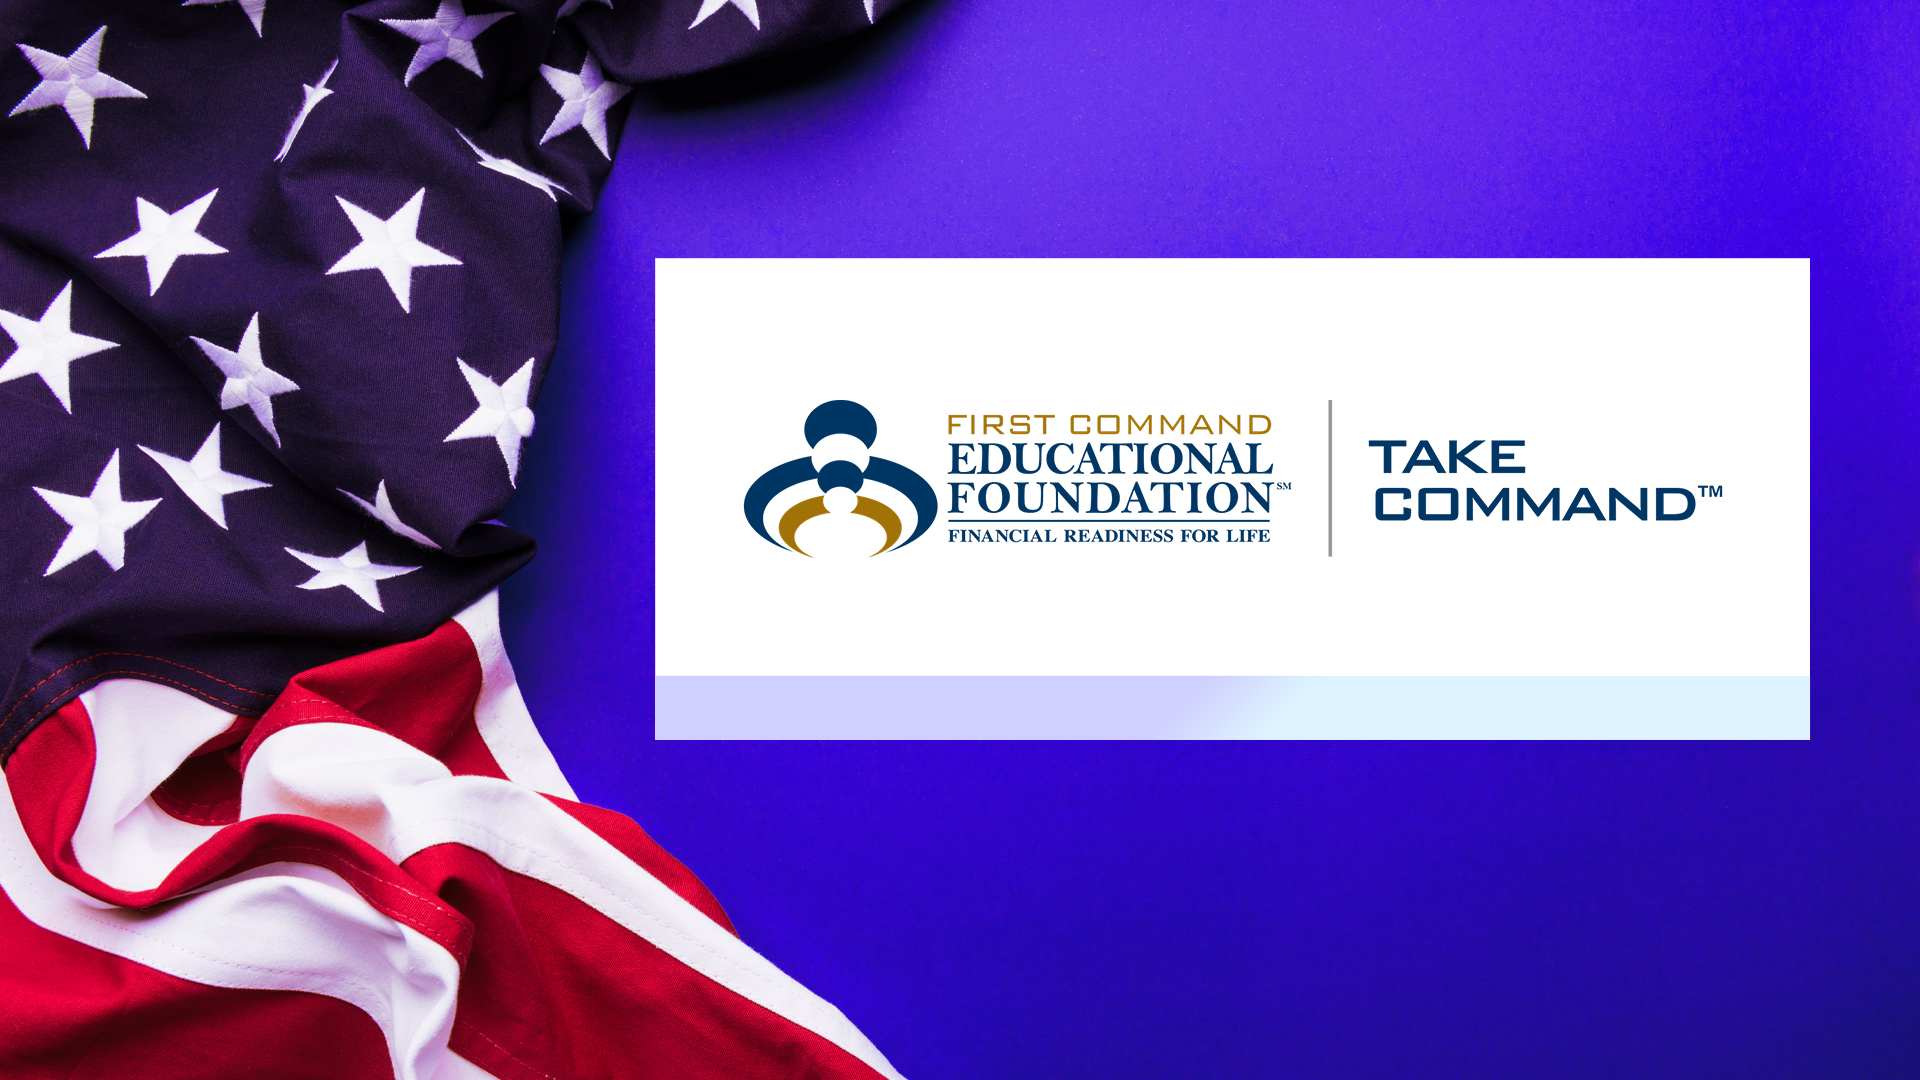 First Command Education Foundation logo